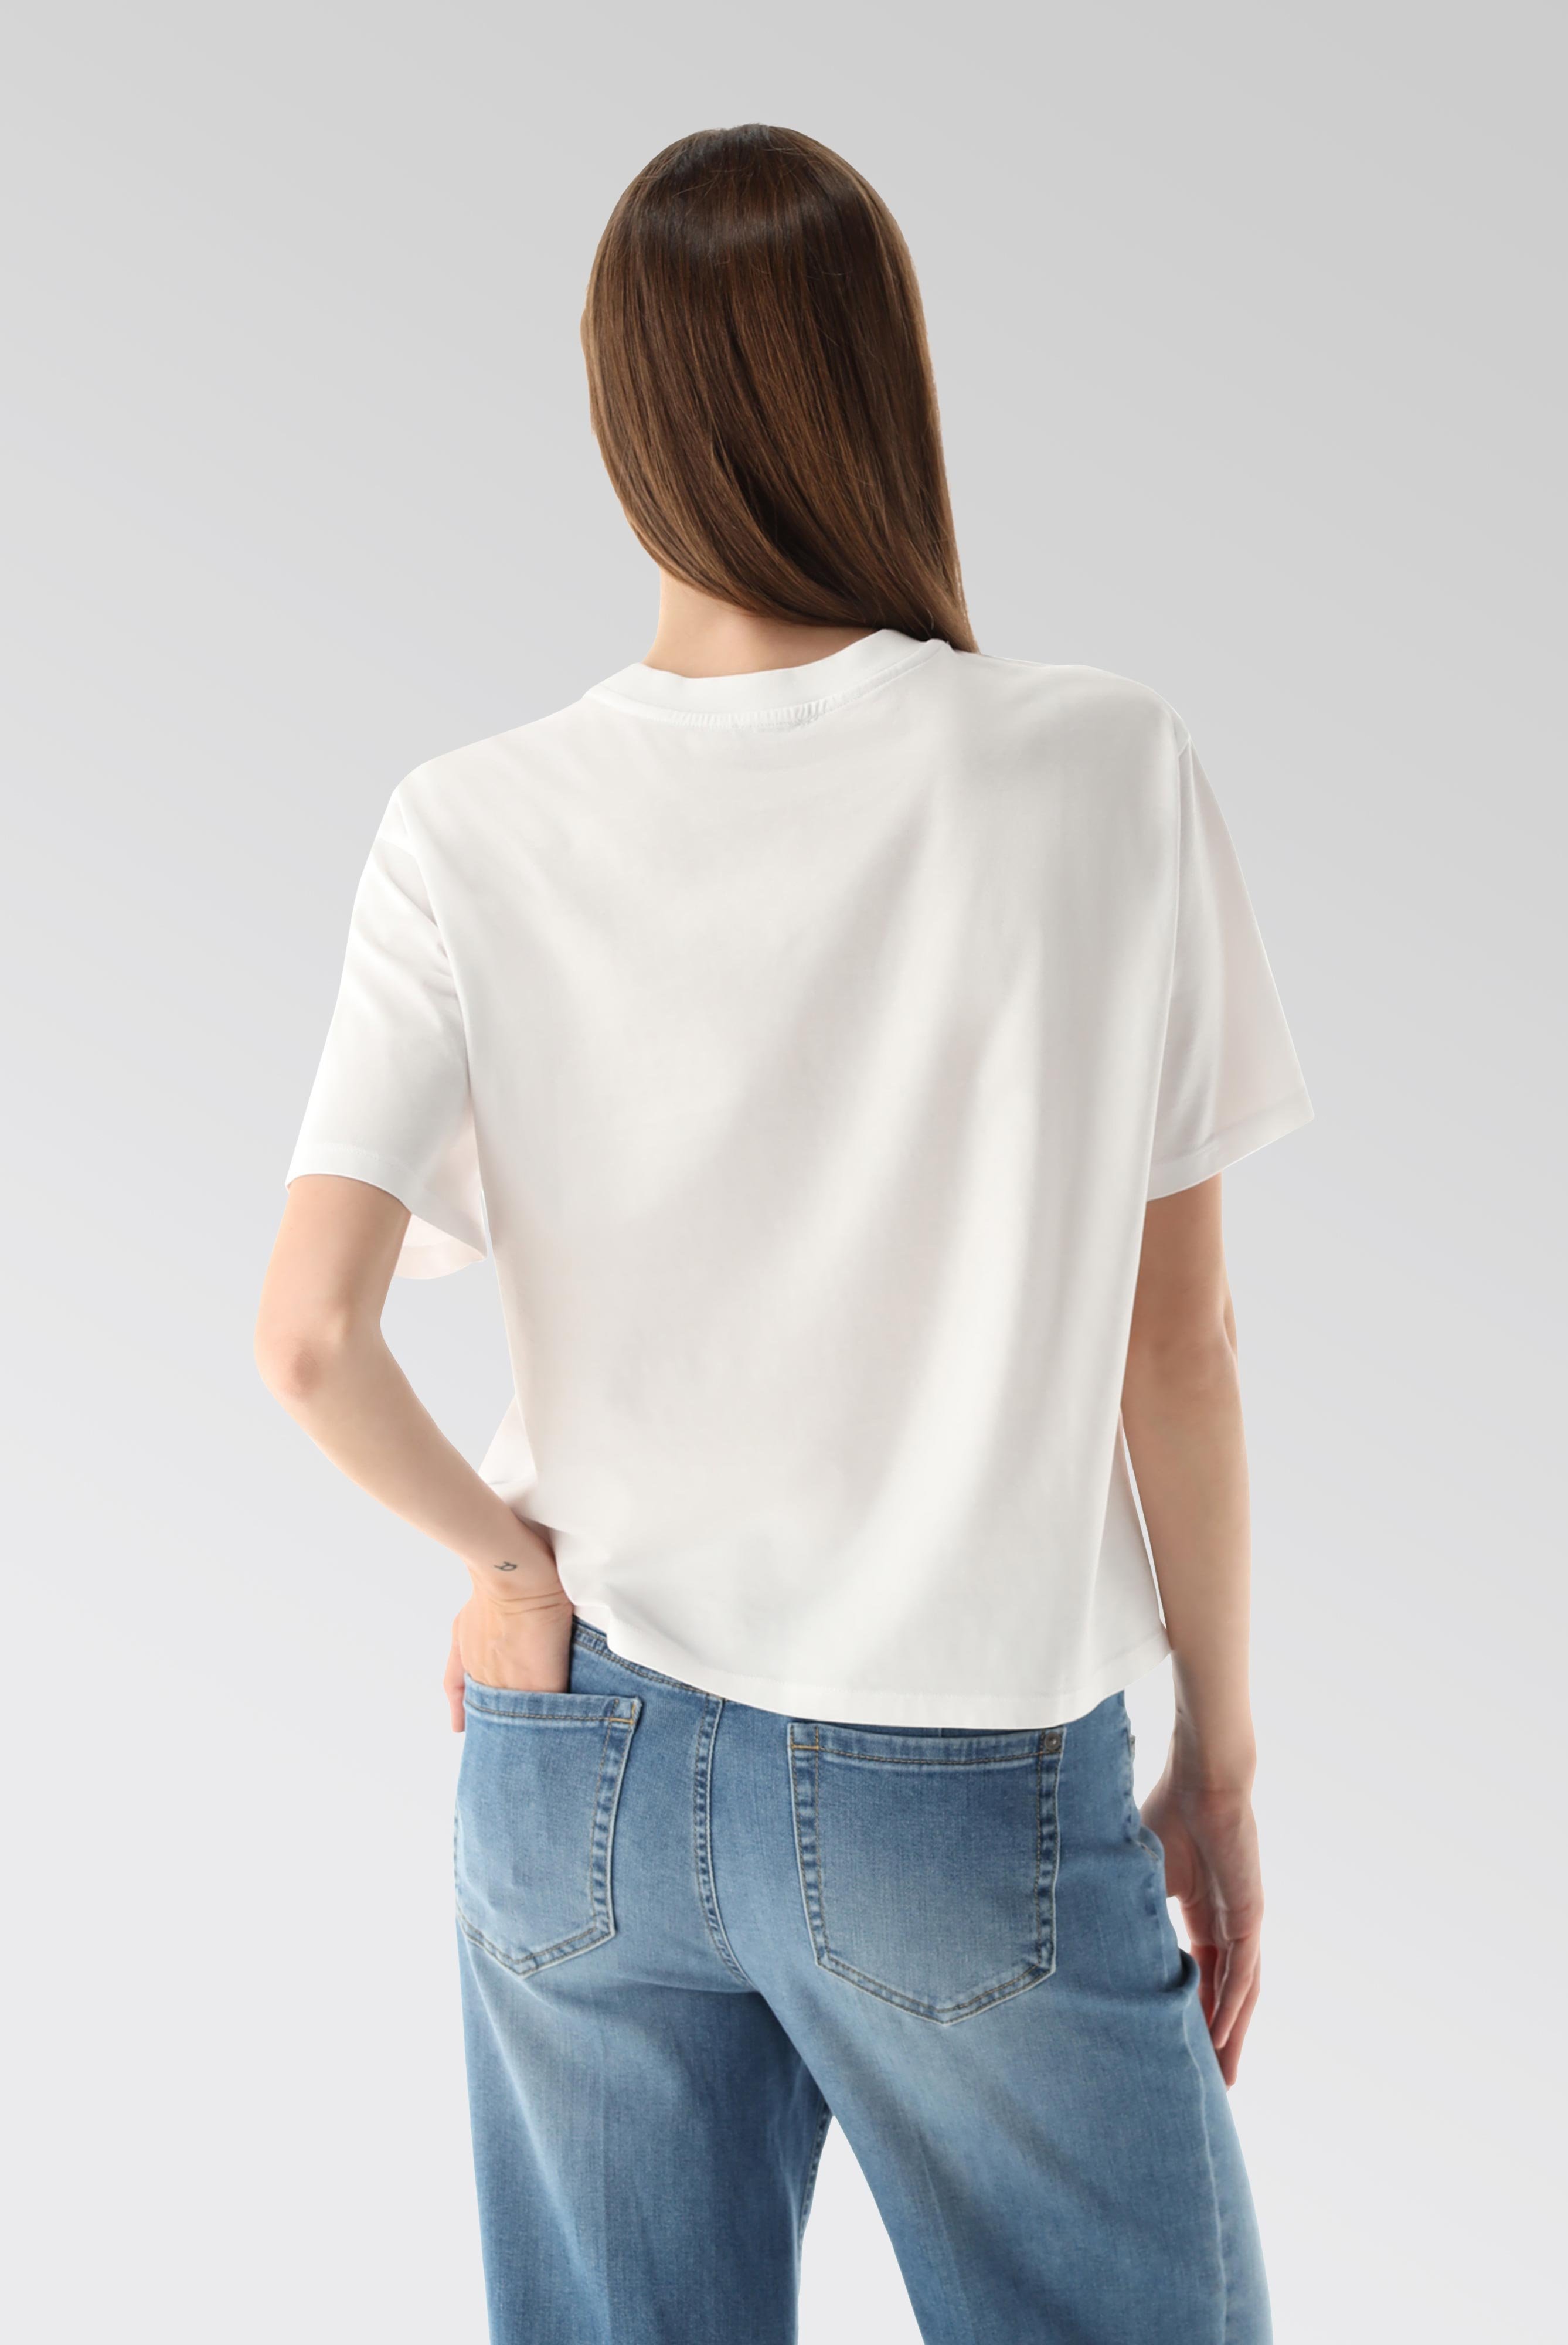 Tops & T-Shirts+T-Shirt Relaxed fit+05.2912..Z20044.000.S